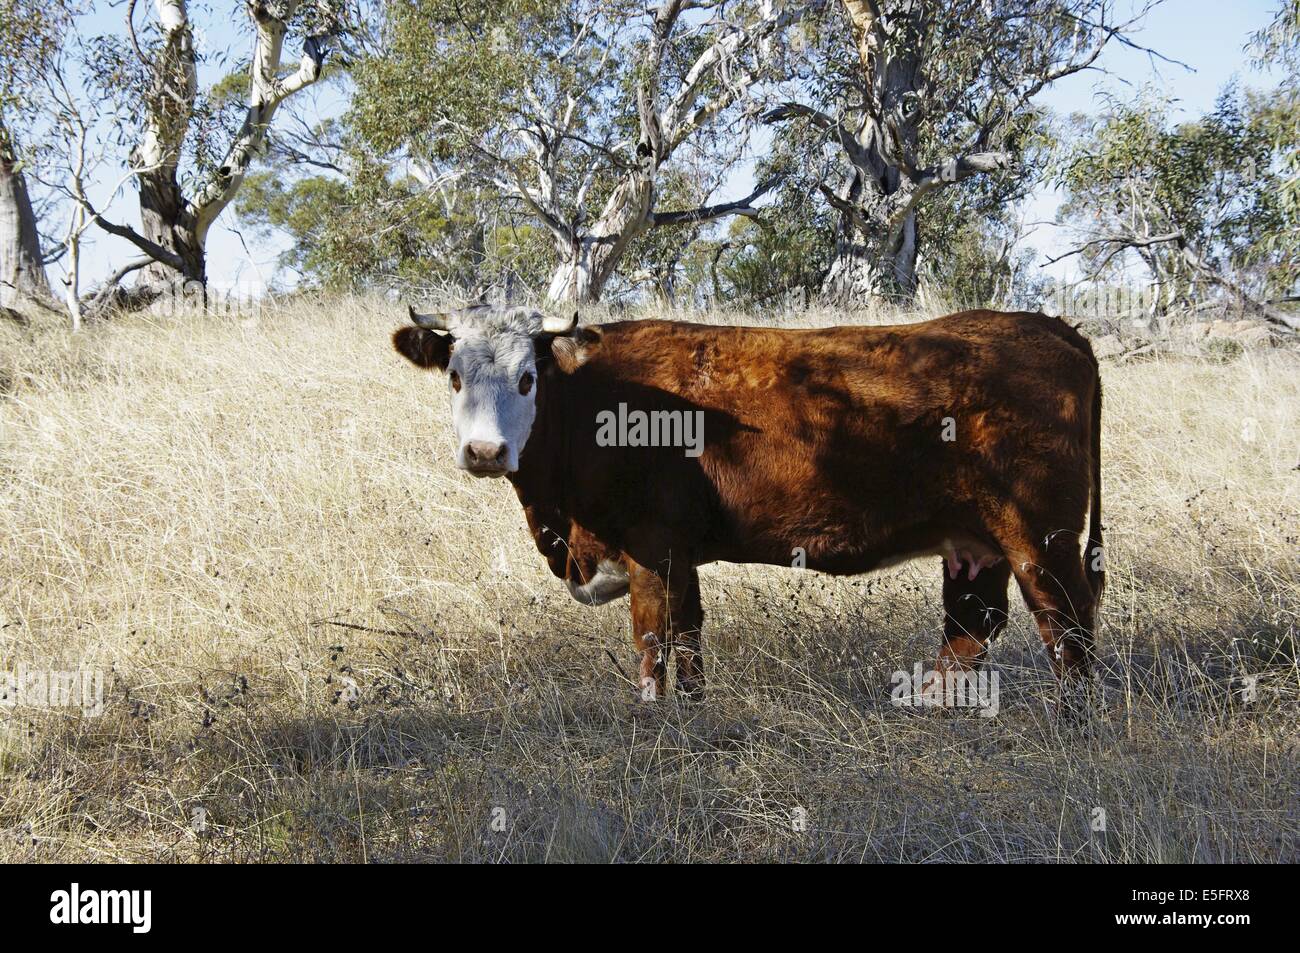 Cow in paddock Stock Photo